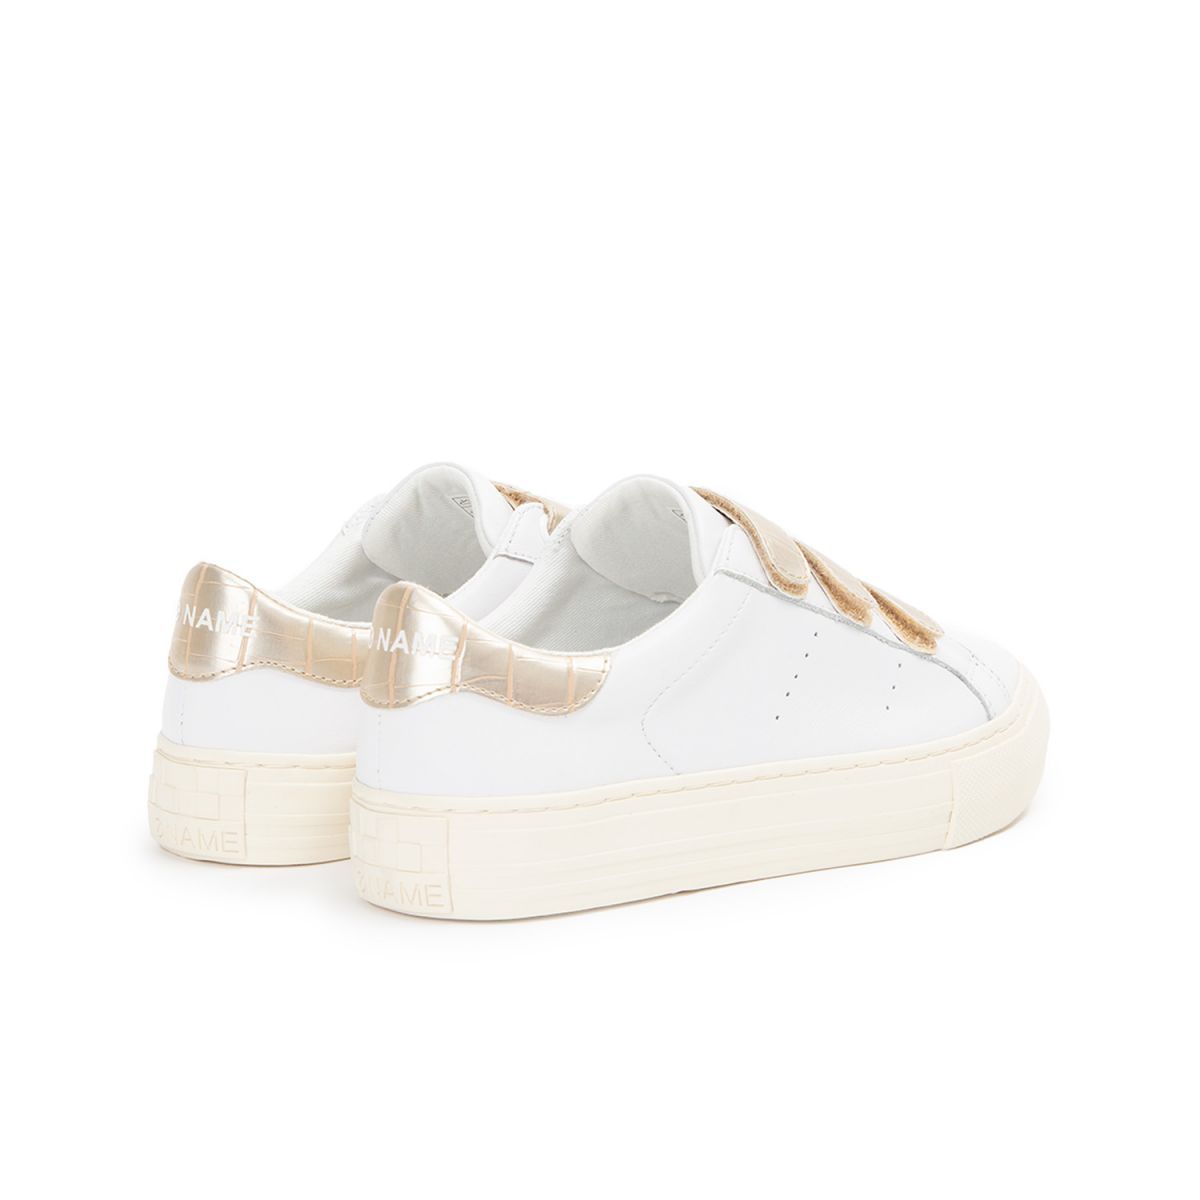 Arcade Straps White Gold Sneakers KNGDSC0474 - 4